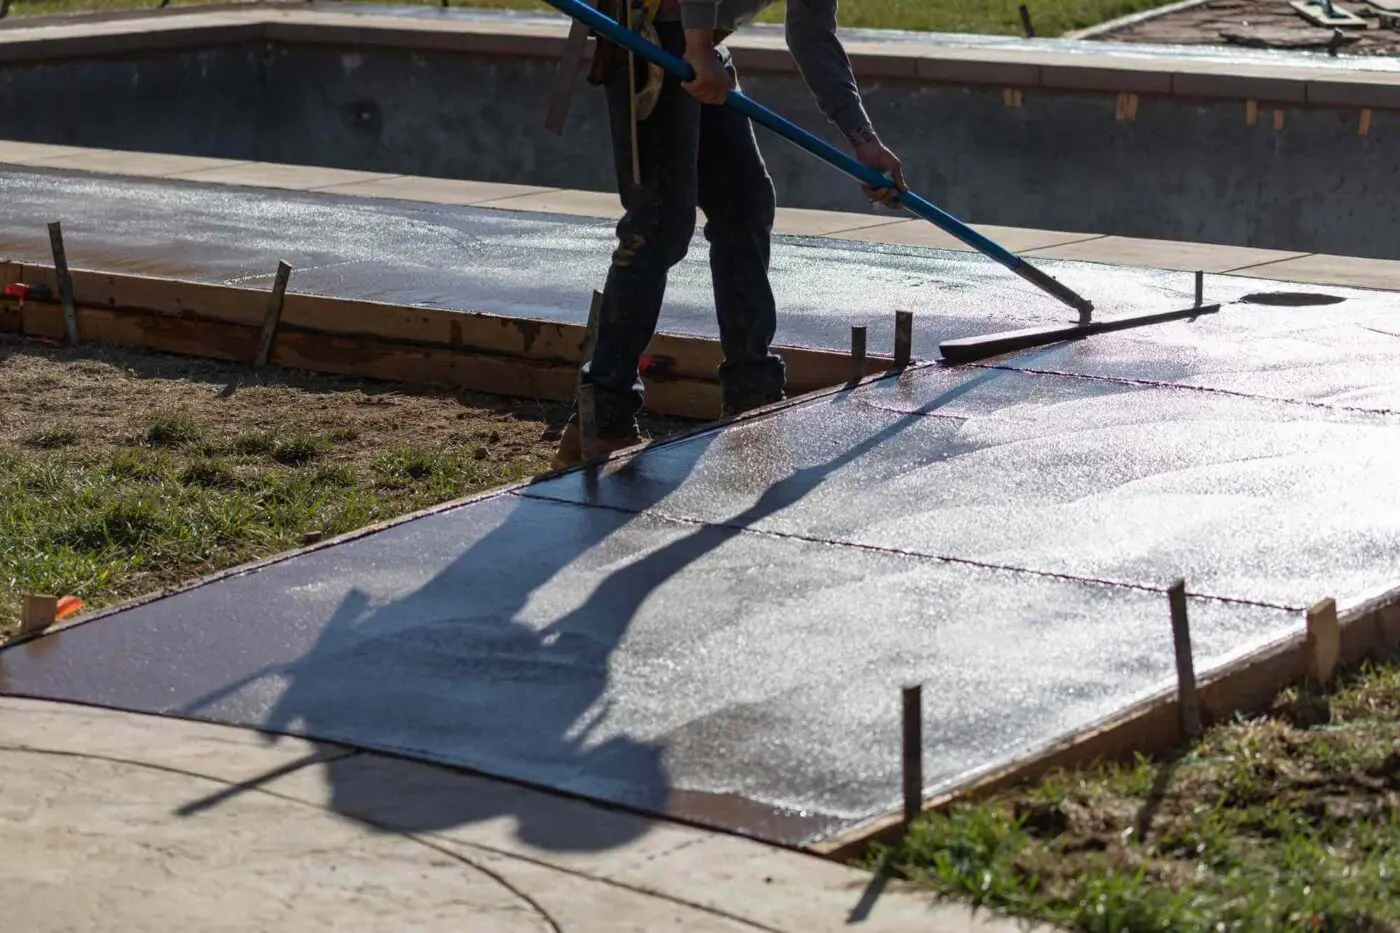 A licensed concrete contractor smooths the surface of freshly poured concrete with a long-handled tool. The concrete sections are framed with wooden boards and metal stakes, and there is a swimming pool in the background. The sun casts the worker’s shadow on the concrete, Gardnerville NV. Contact for a free quote.